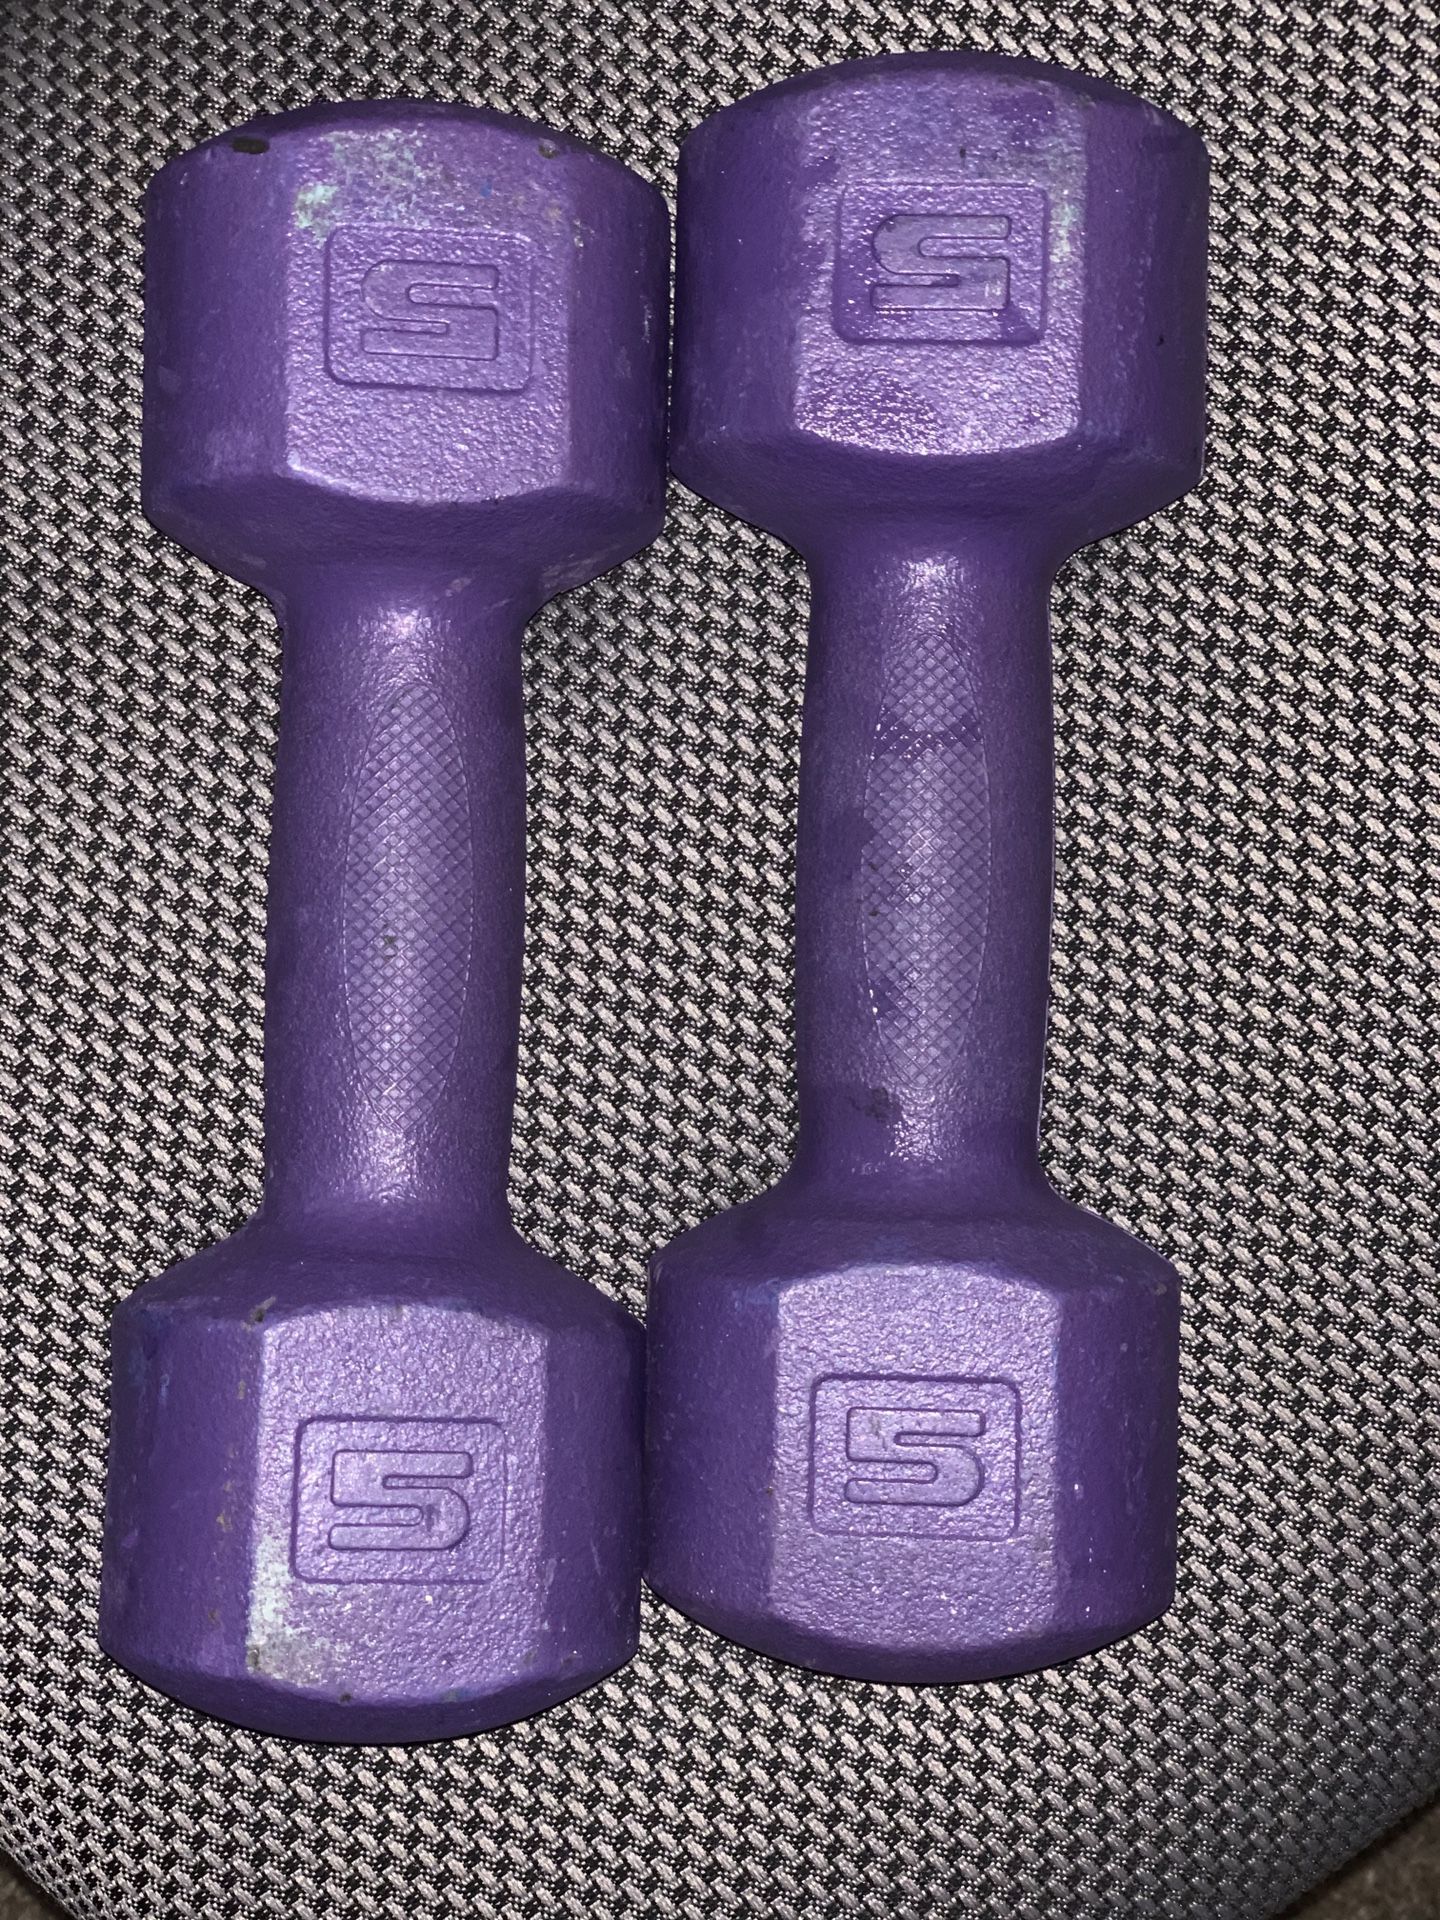 Pair of 5lbs dumbbell